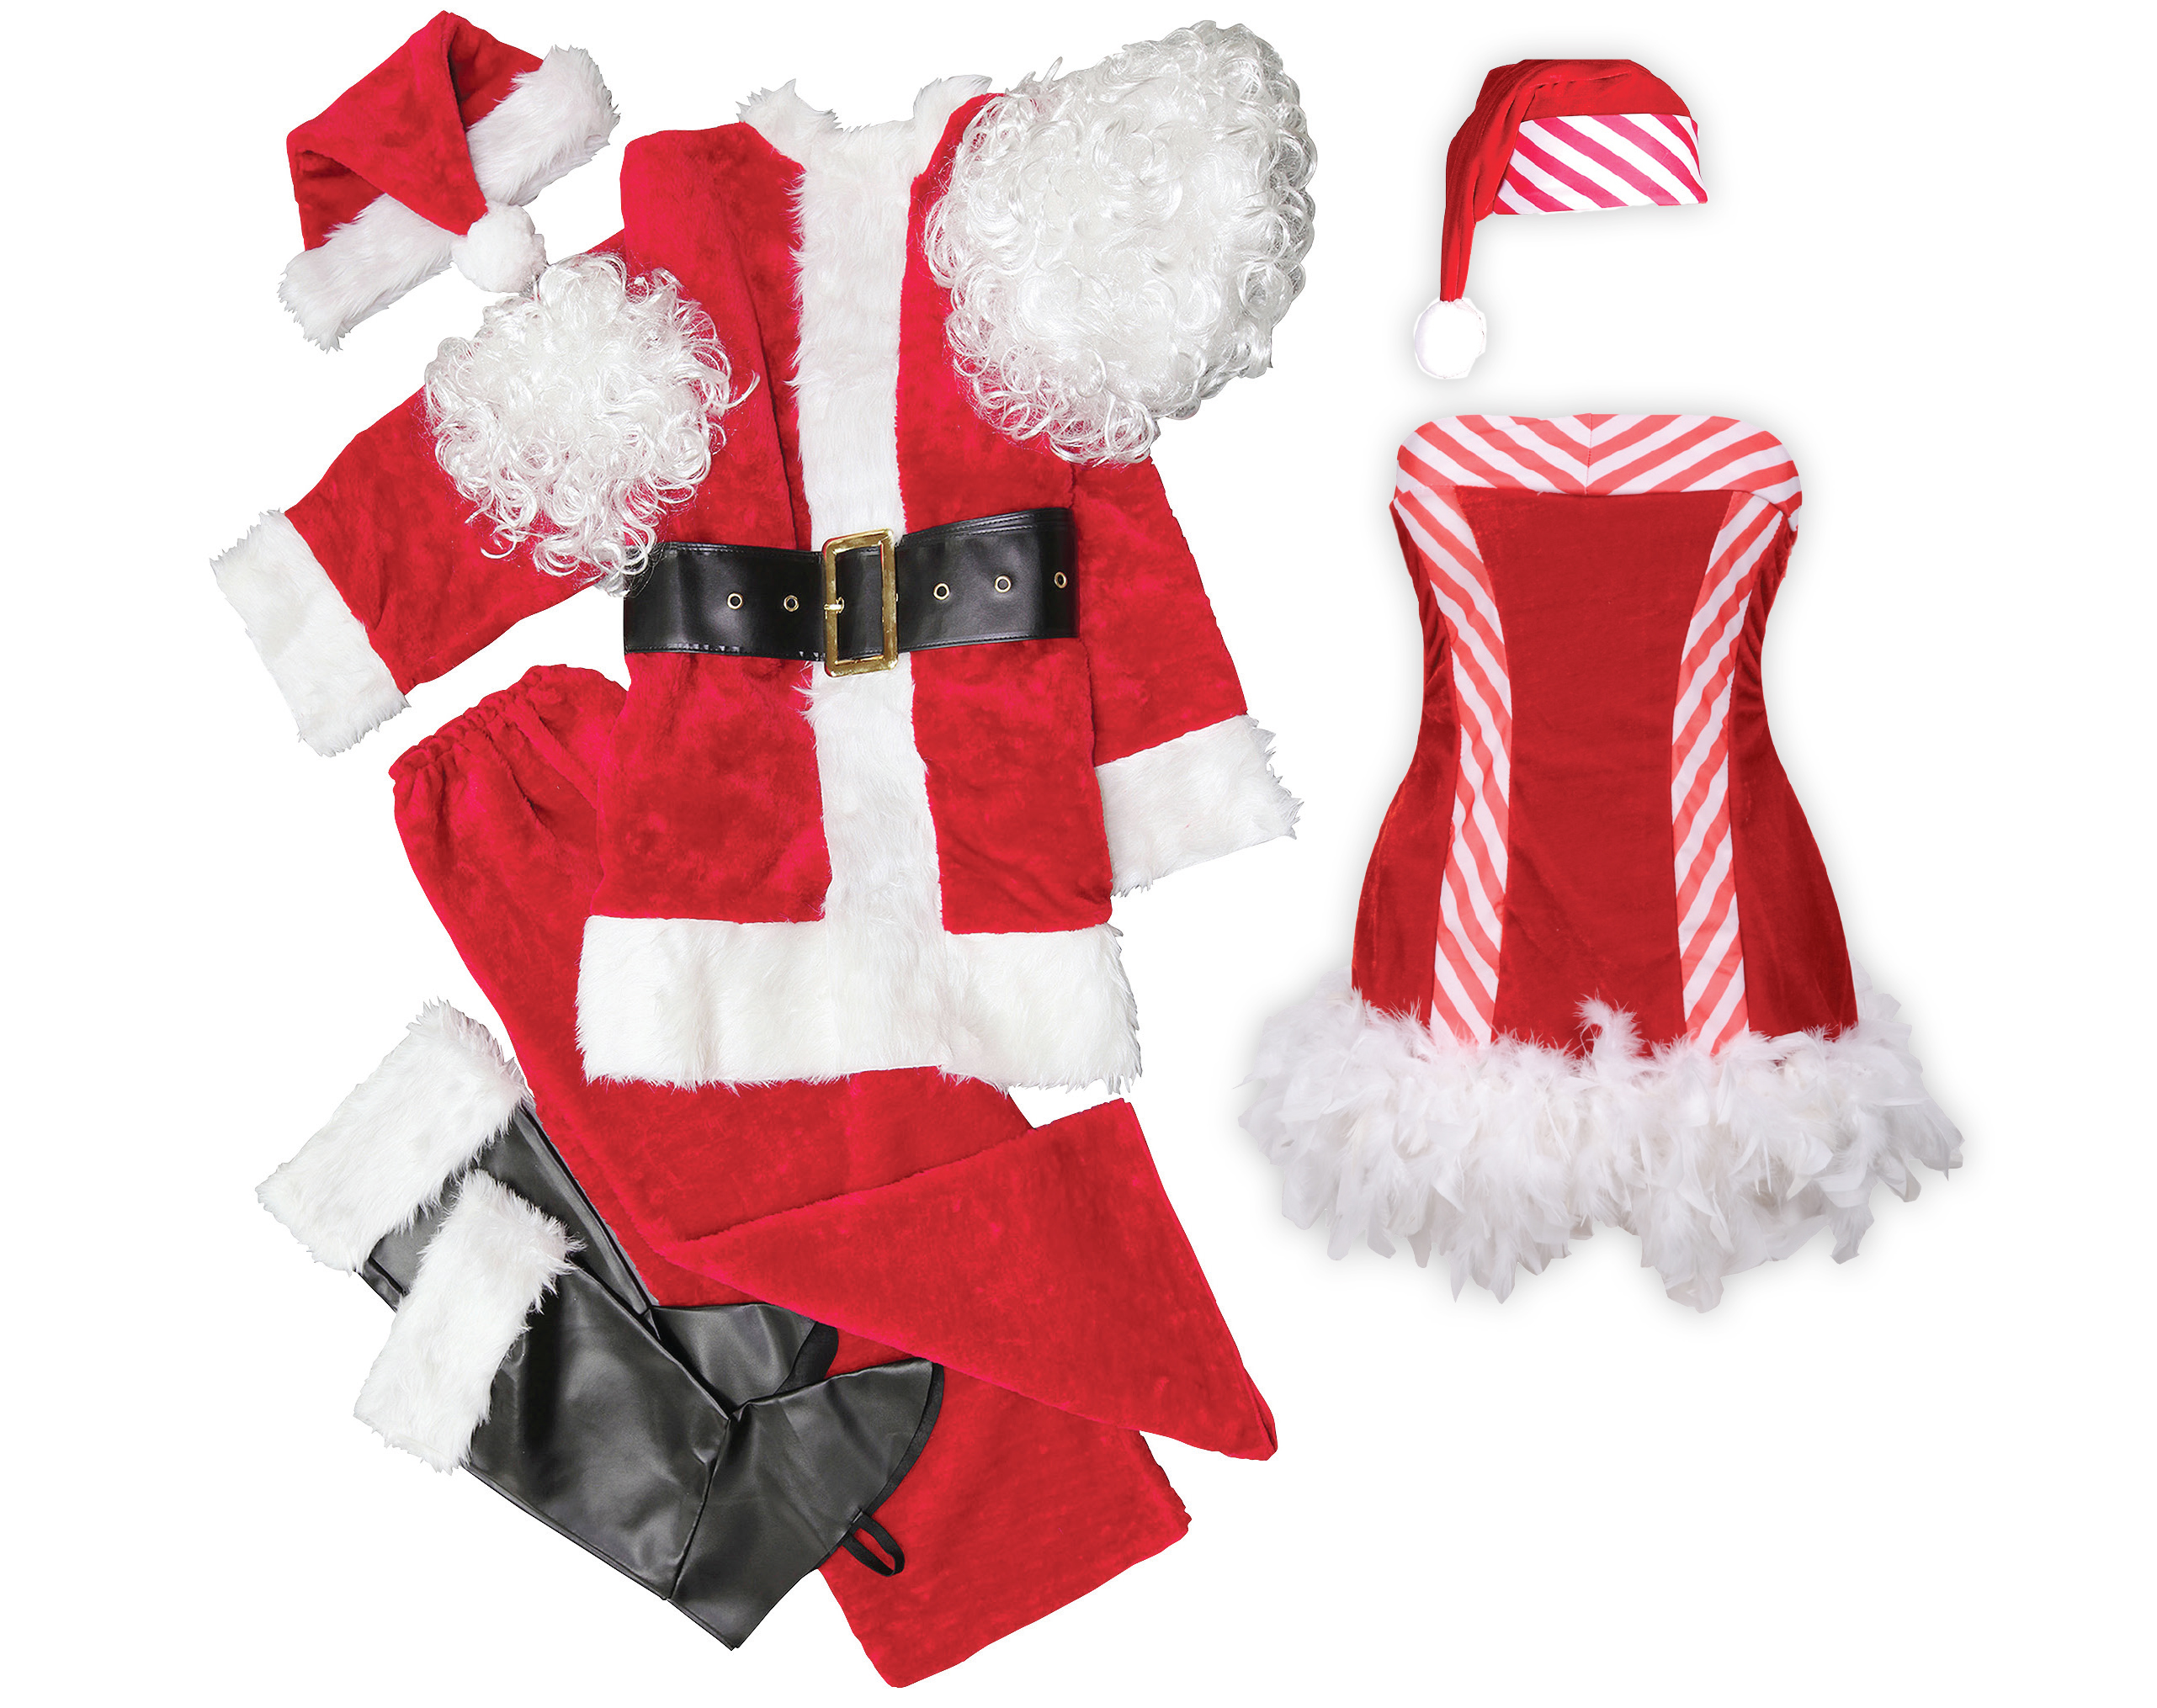 Get Dressed Up and Into the Holiday Spirit at the SantaCon Bar Crawl in ...